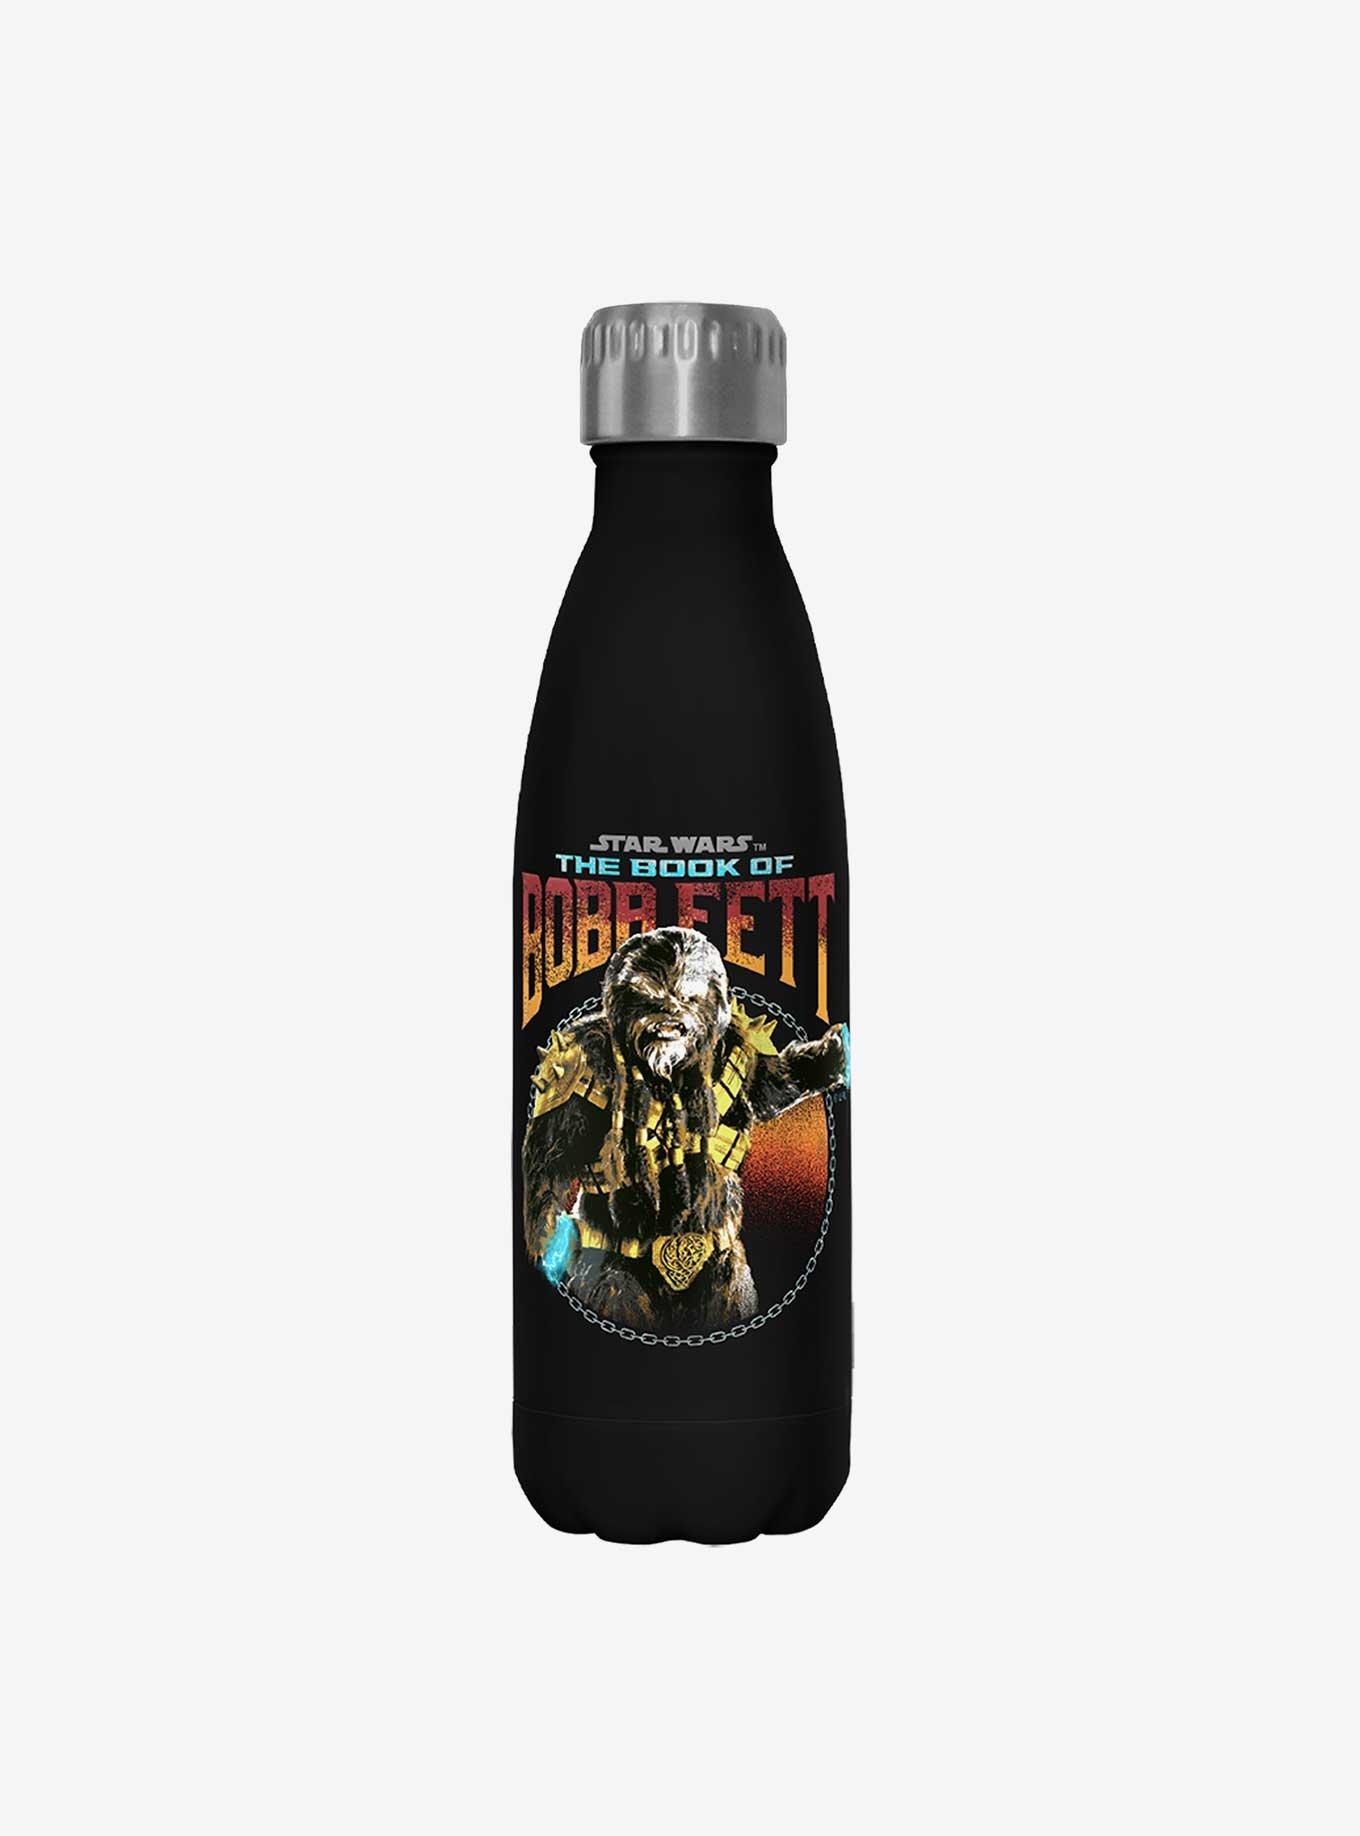 Star Wars The Book of Boba Fett Stay The Course Black Stainless Steel Water Bottle